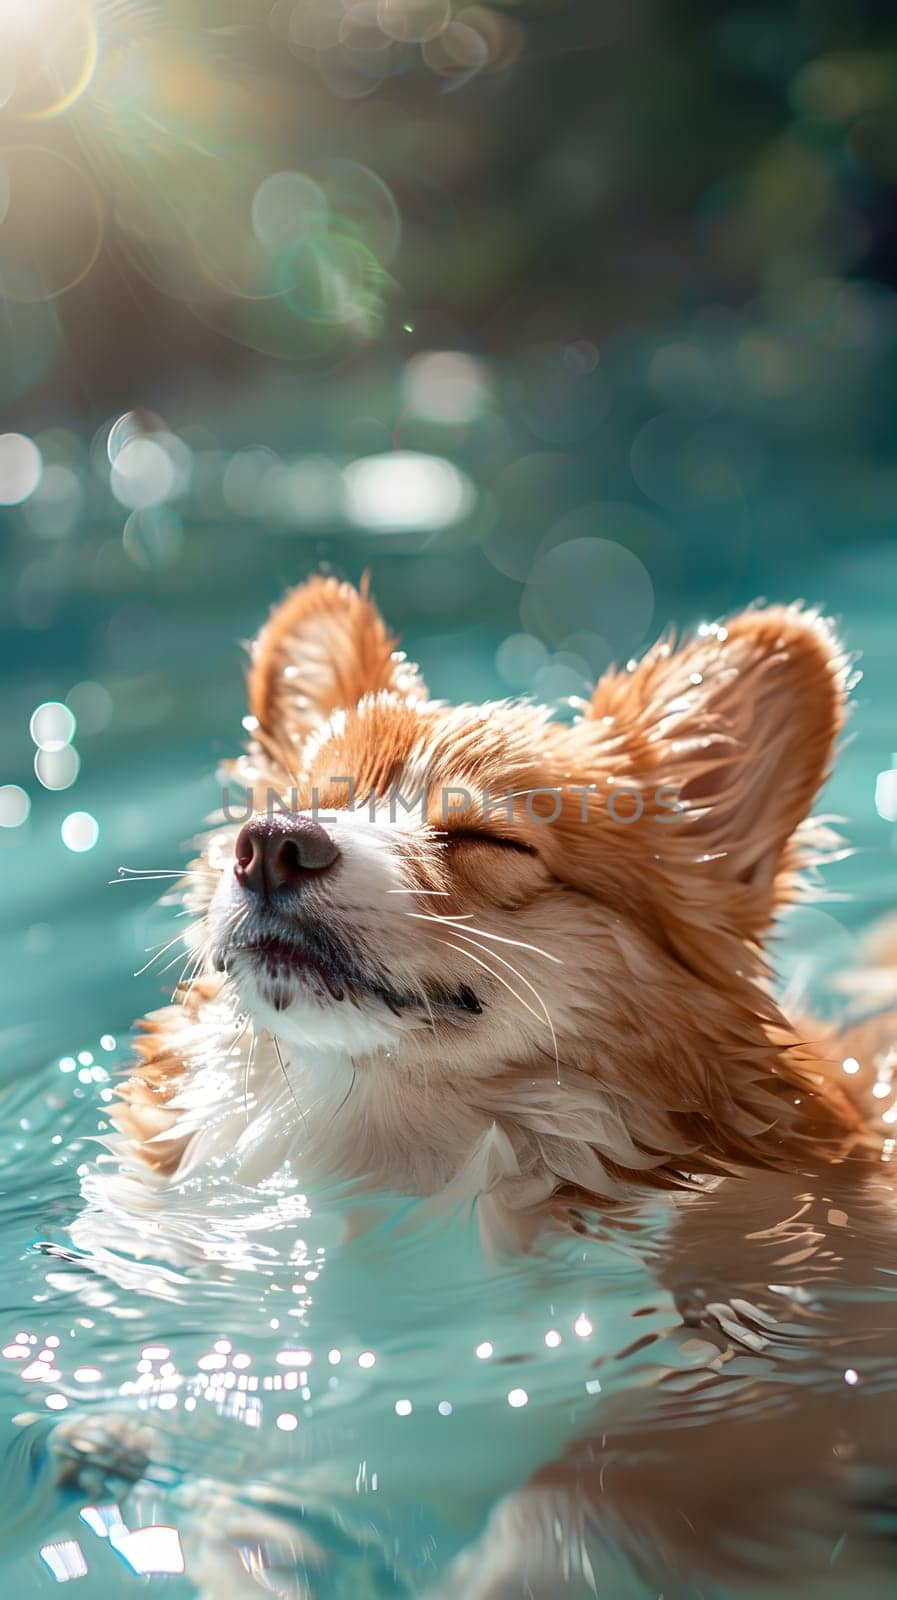 A Canidae species, specifically a dog from the Sporting Group breed, is gracefully swimming in a pool with its eyes closed, showcasing its carnivorous instincts